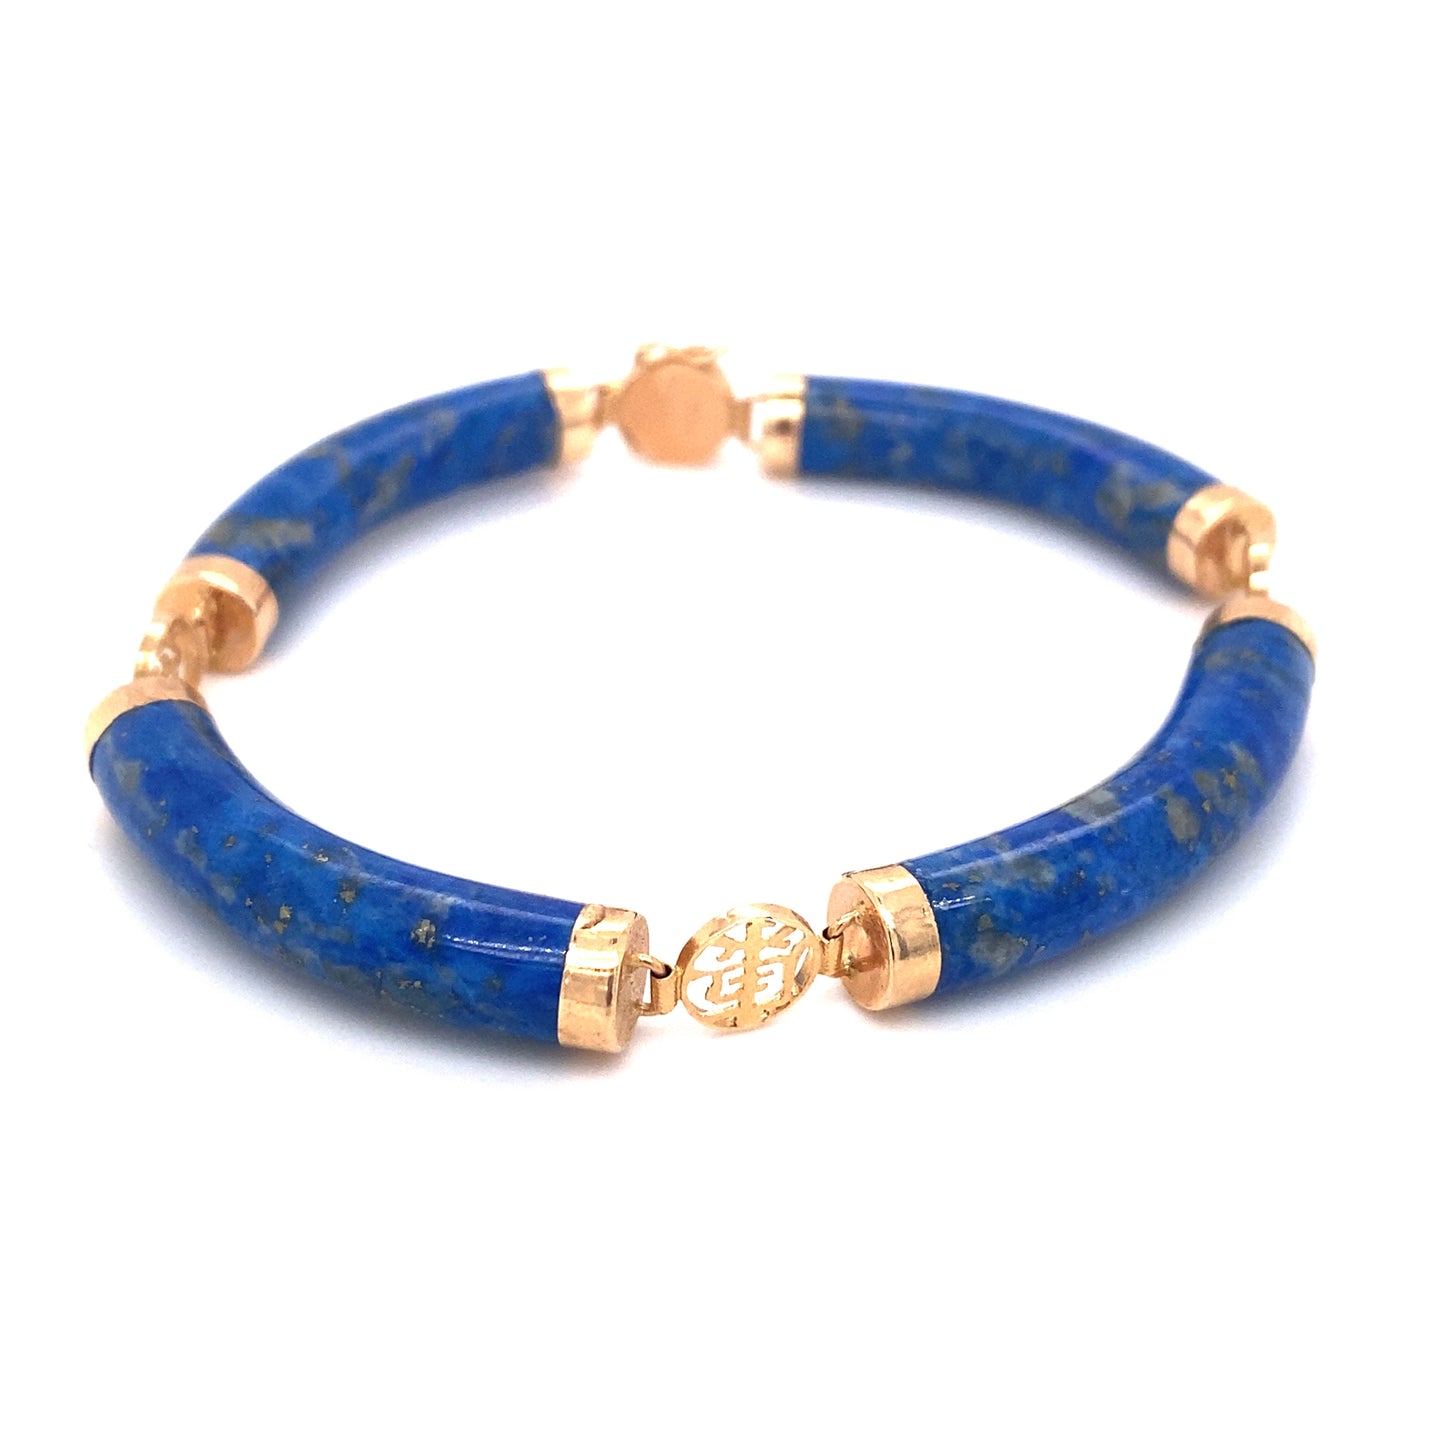 Circa 1980s Chinese Luck Symbol Lapis Lazuli Curved Link Bracelet in 14K Gold